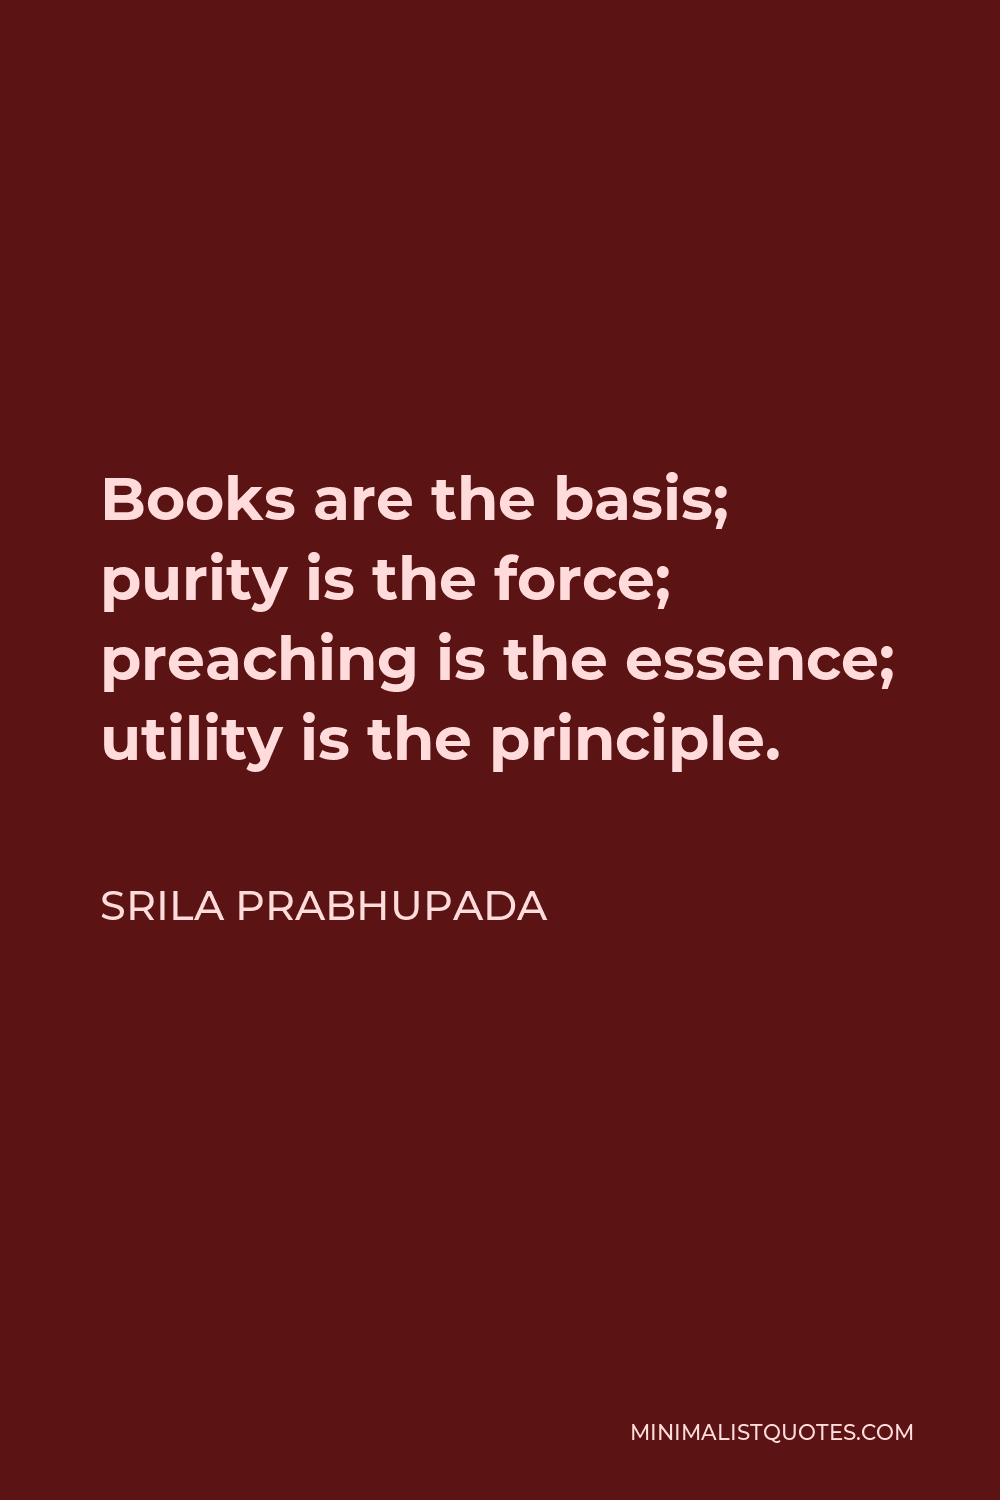 Srila Prabhupada Quote - Books are the basis; purity is the force; preaching is the essence; utility is the principle.